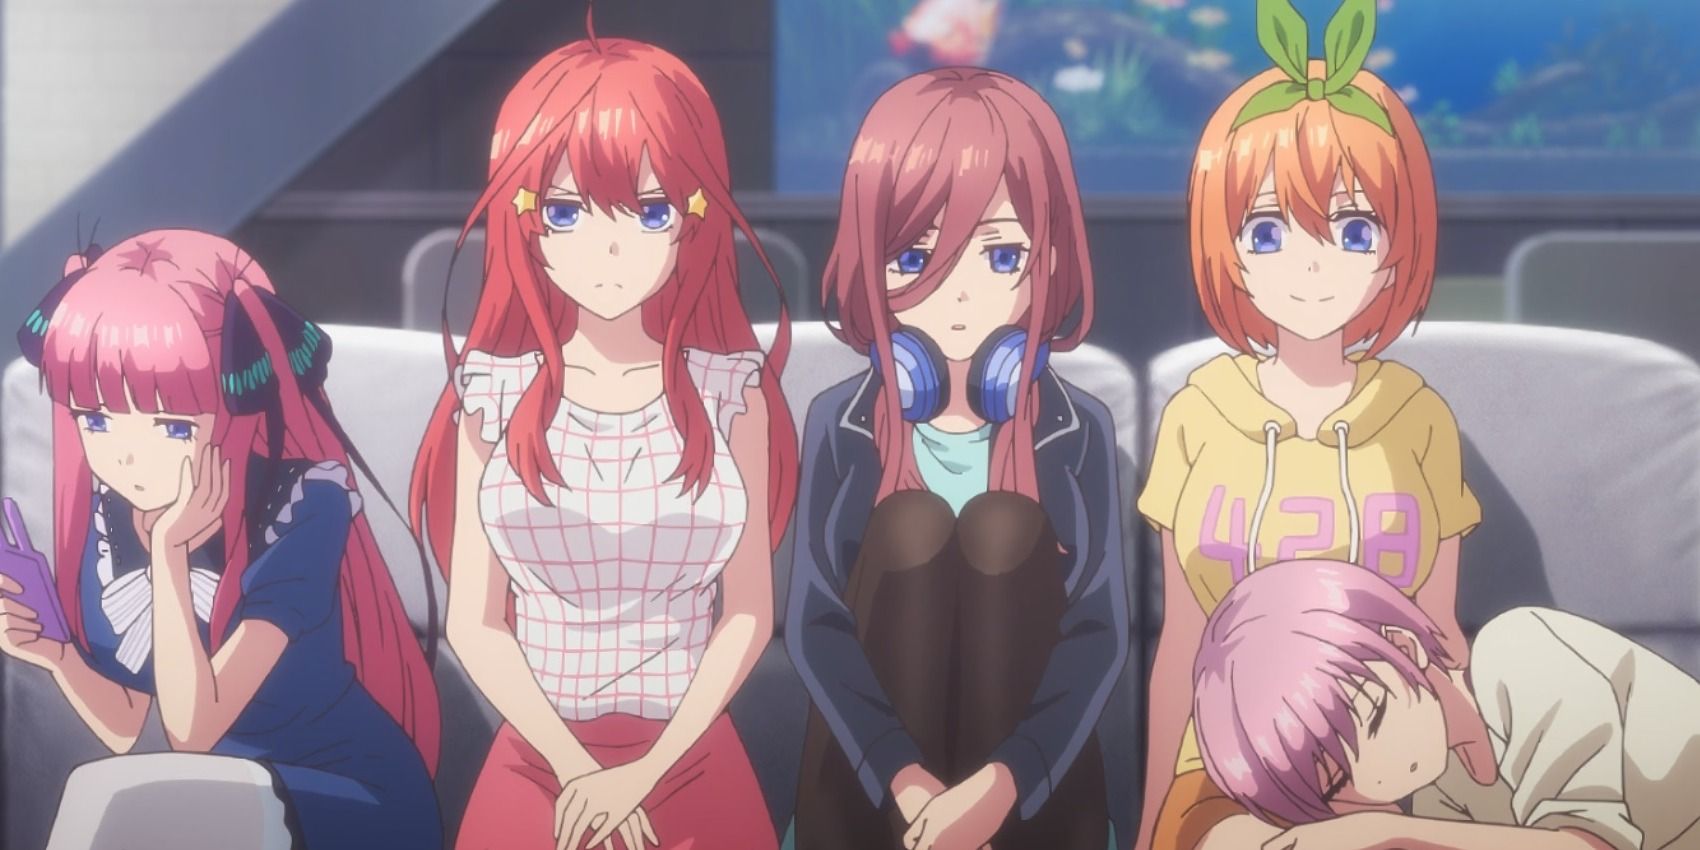 the five sisters from the anime The Quintessential Quintuplets